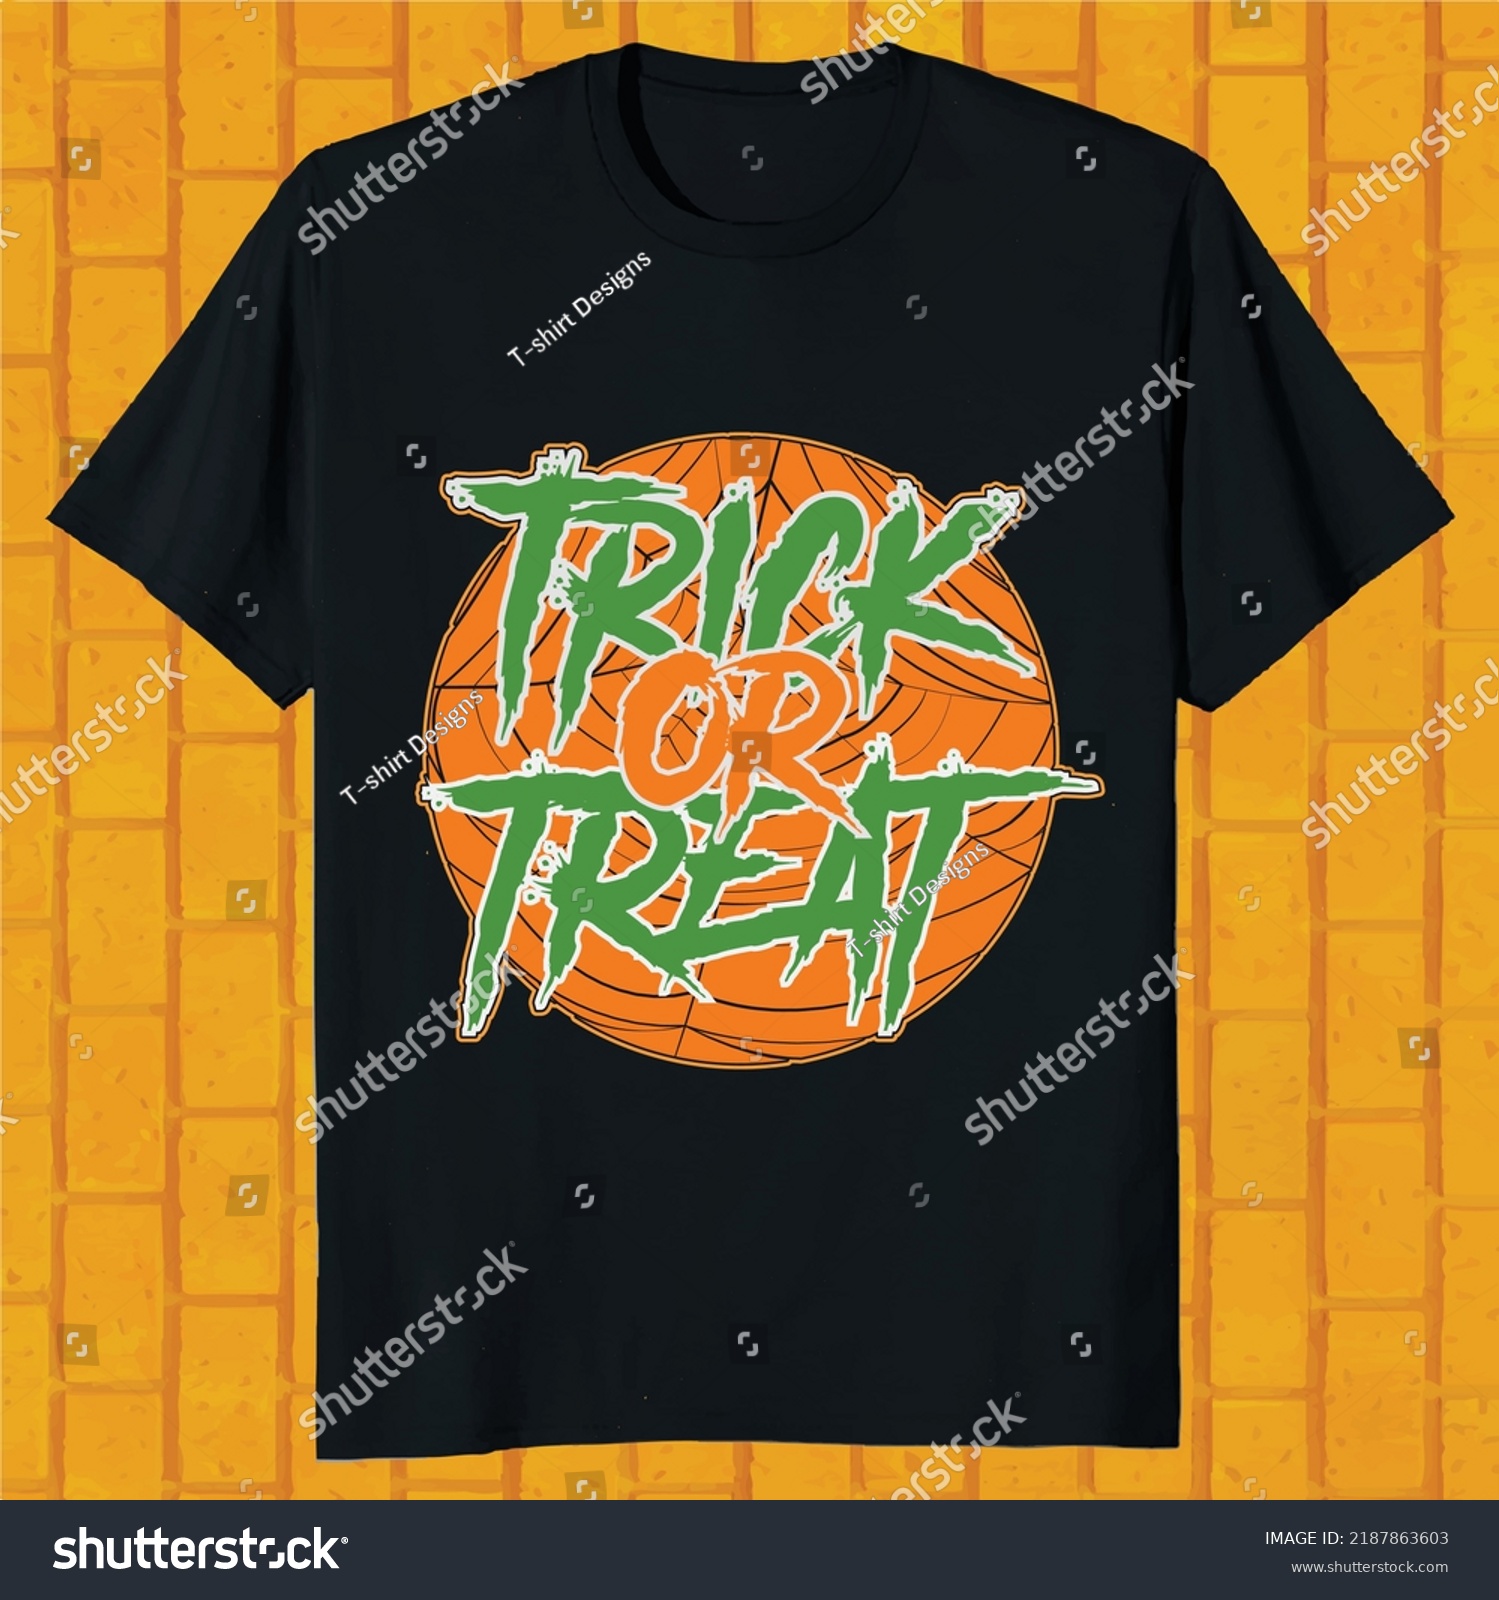 SVG of trick or treat hello ween t-shirt design svg